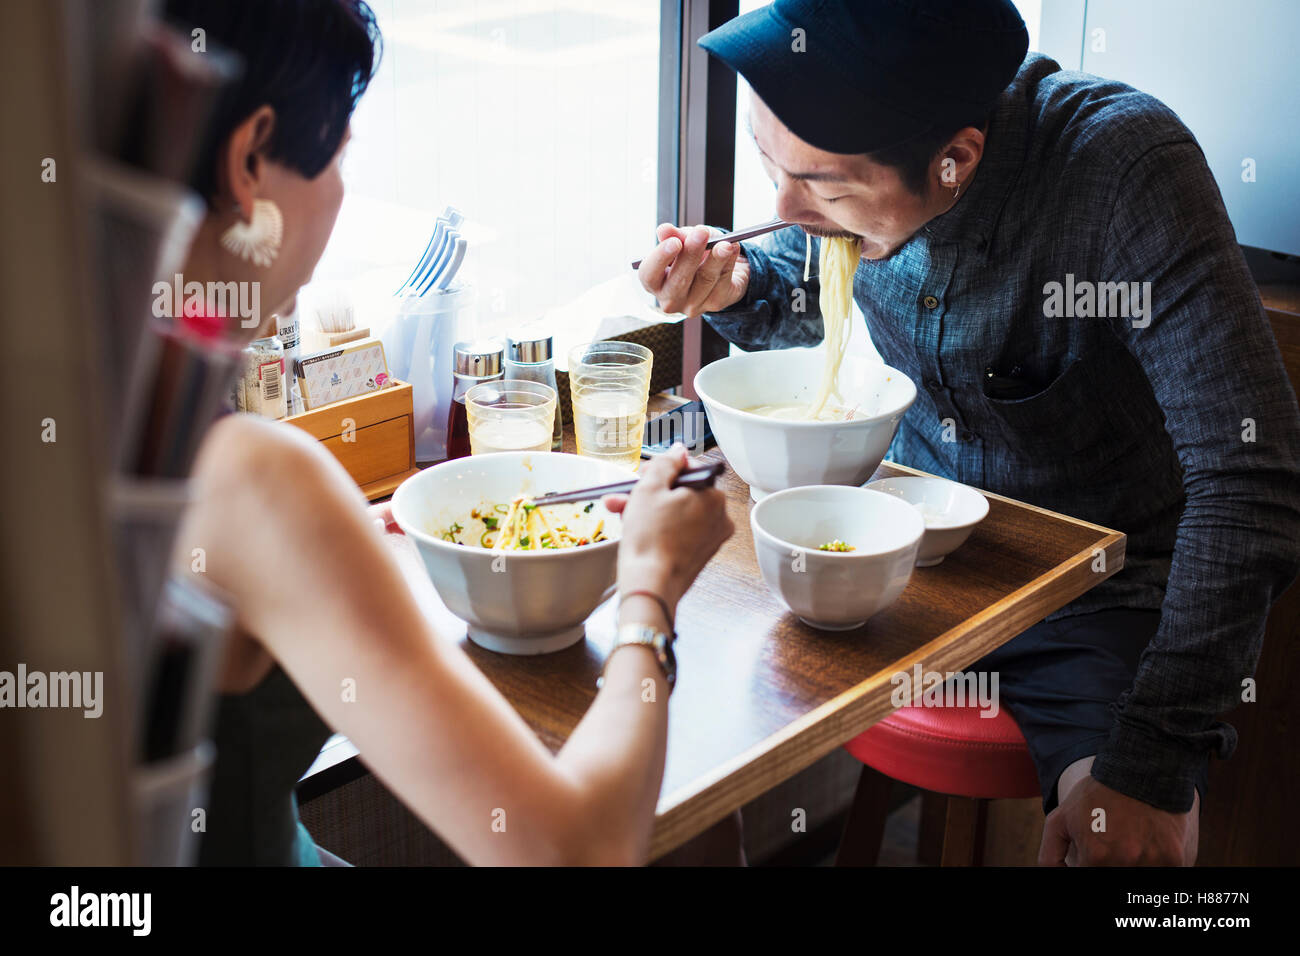 A ramen noodle cafe in a city.  A man and woman seated eating noodles from large white bowls. Stock Photo